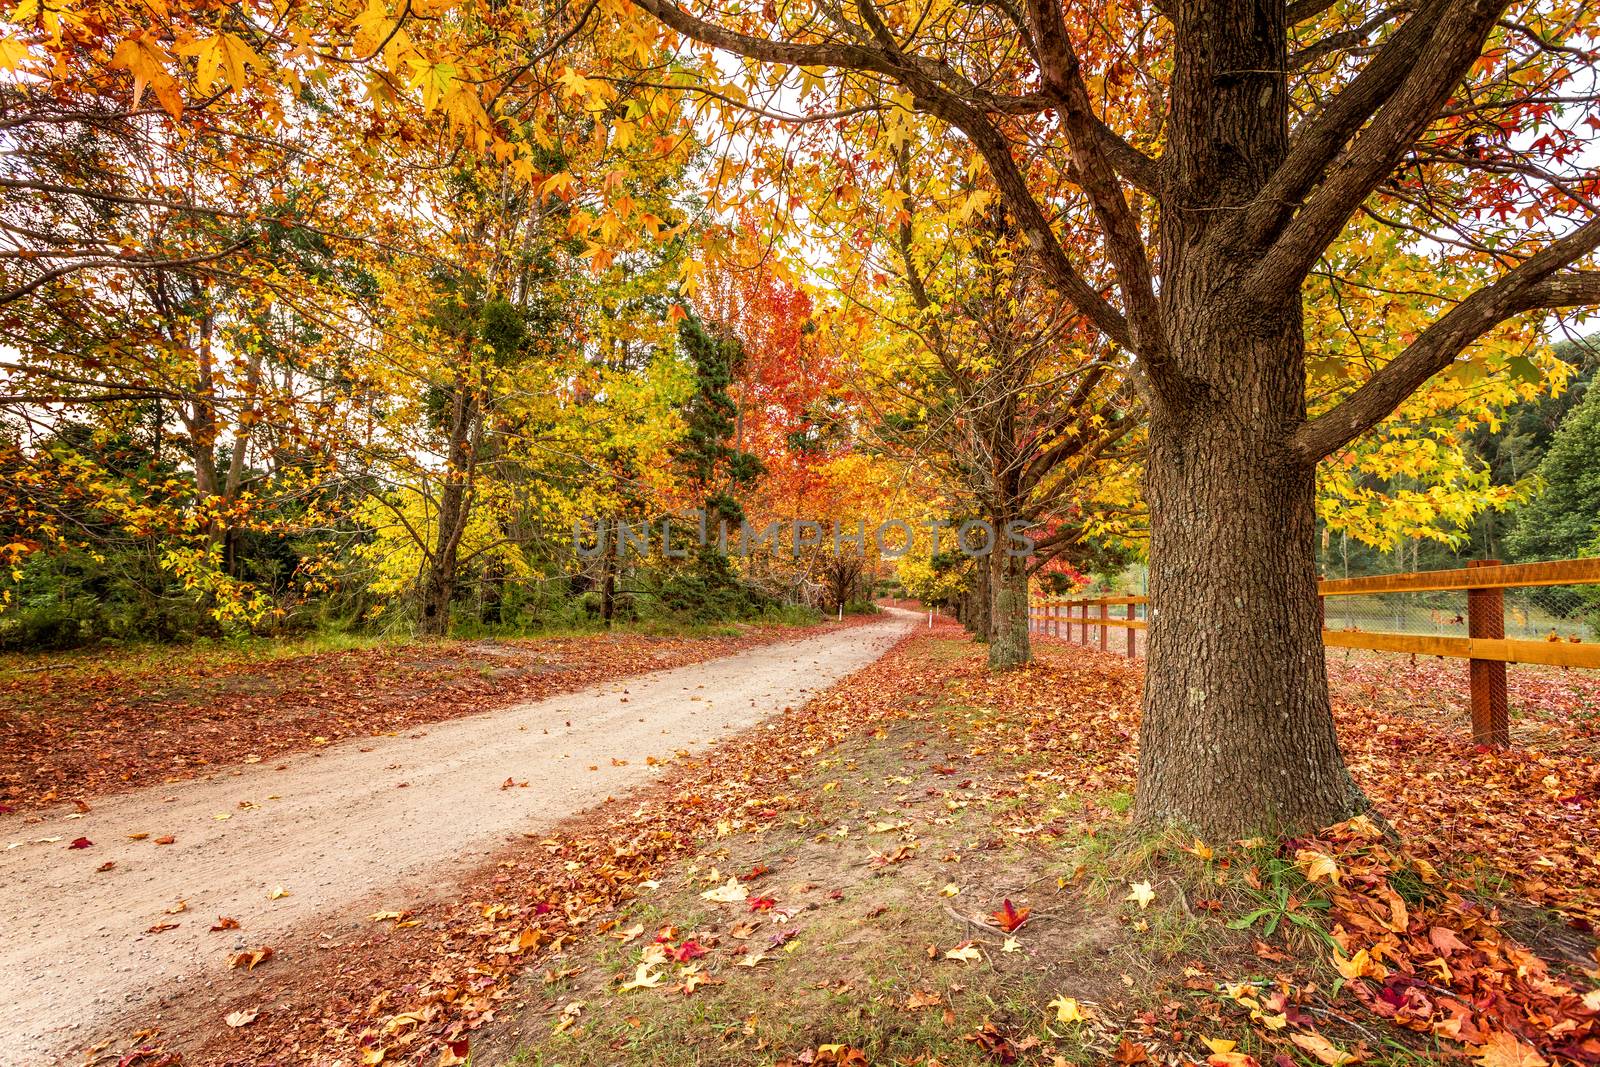 Beautiful scenic country roads in Autumn lined with maples and deciduous trees with leaves an array of various autumnal colour